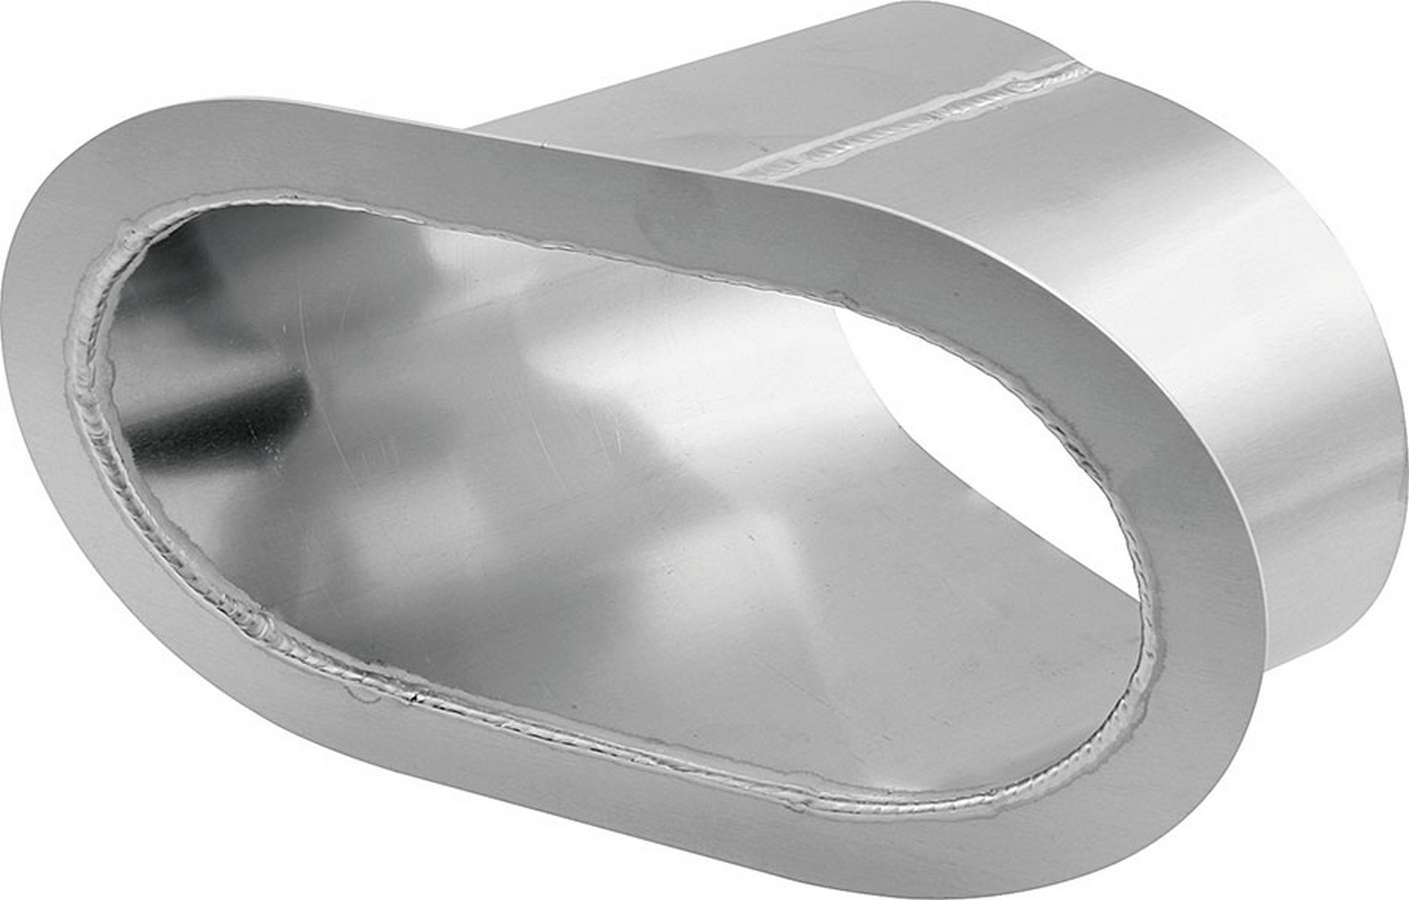 Allstar Performance 34182 - Exhaust Shield, 5 x 9 in Oval, Single 55 Degree Outlet, Aluminum, Natural, Each